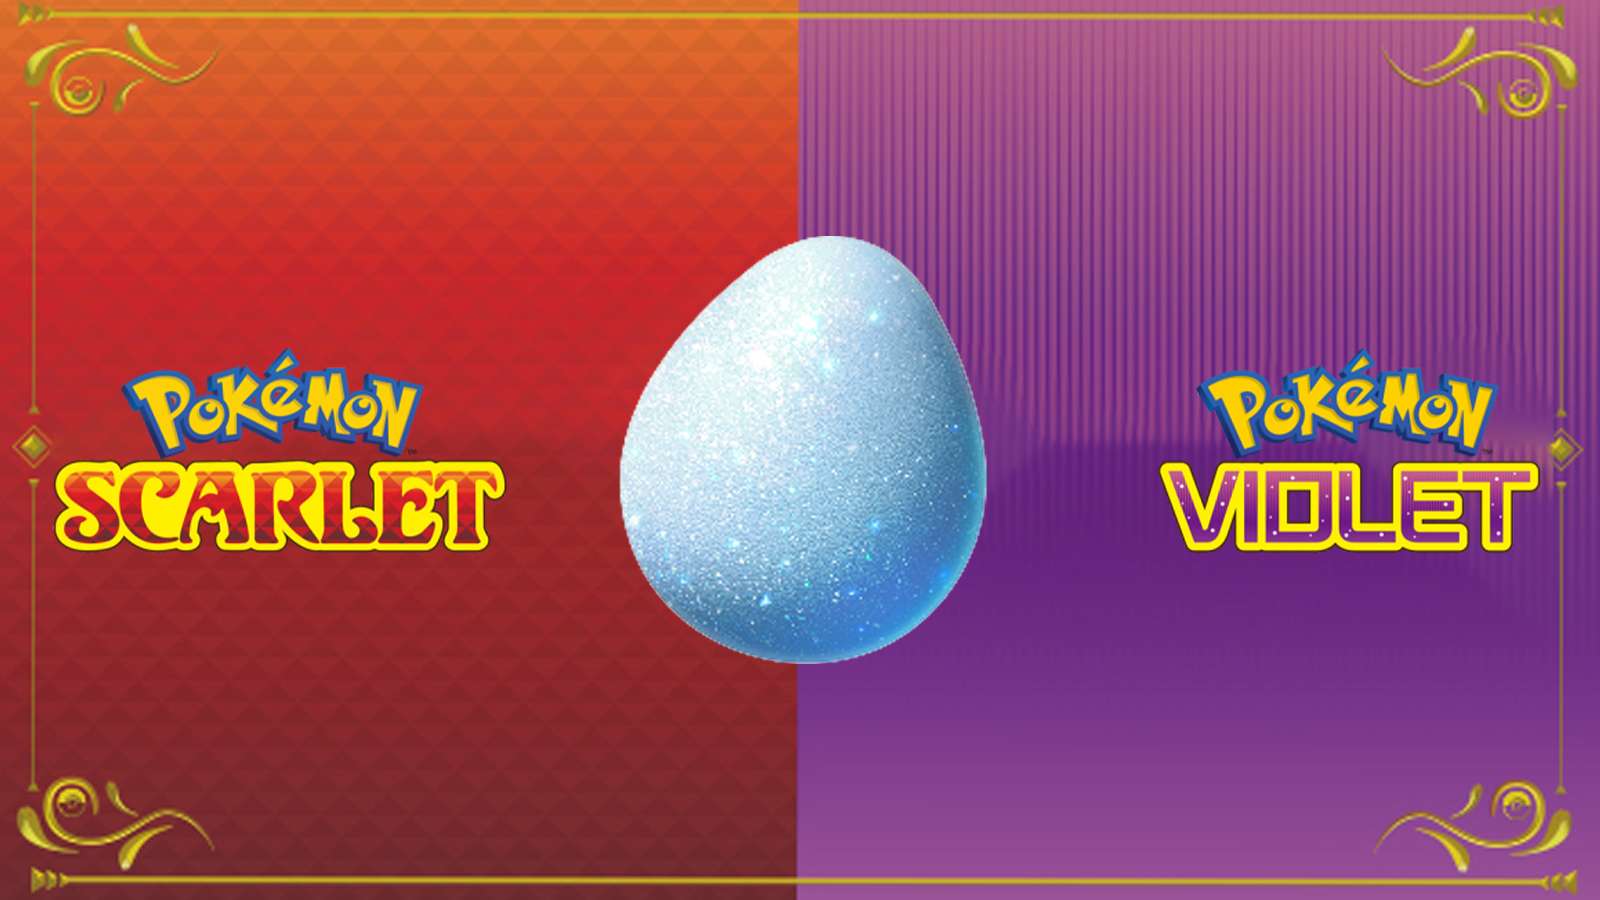 A Lucky Egg in Pokemon Scarlet and Violet